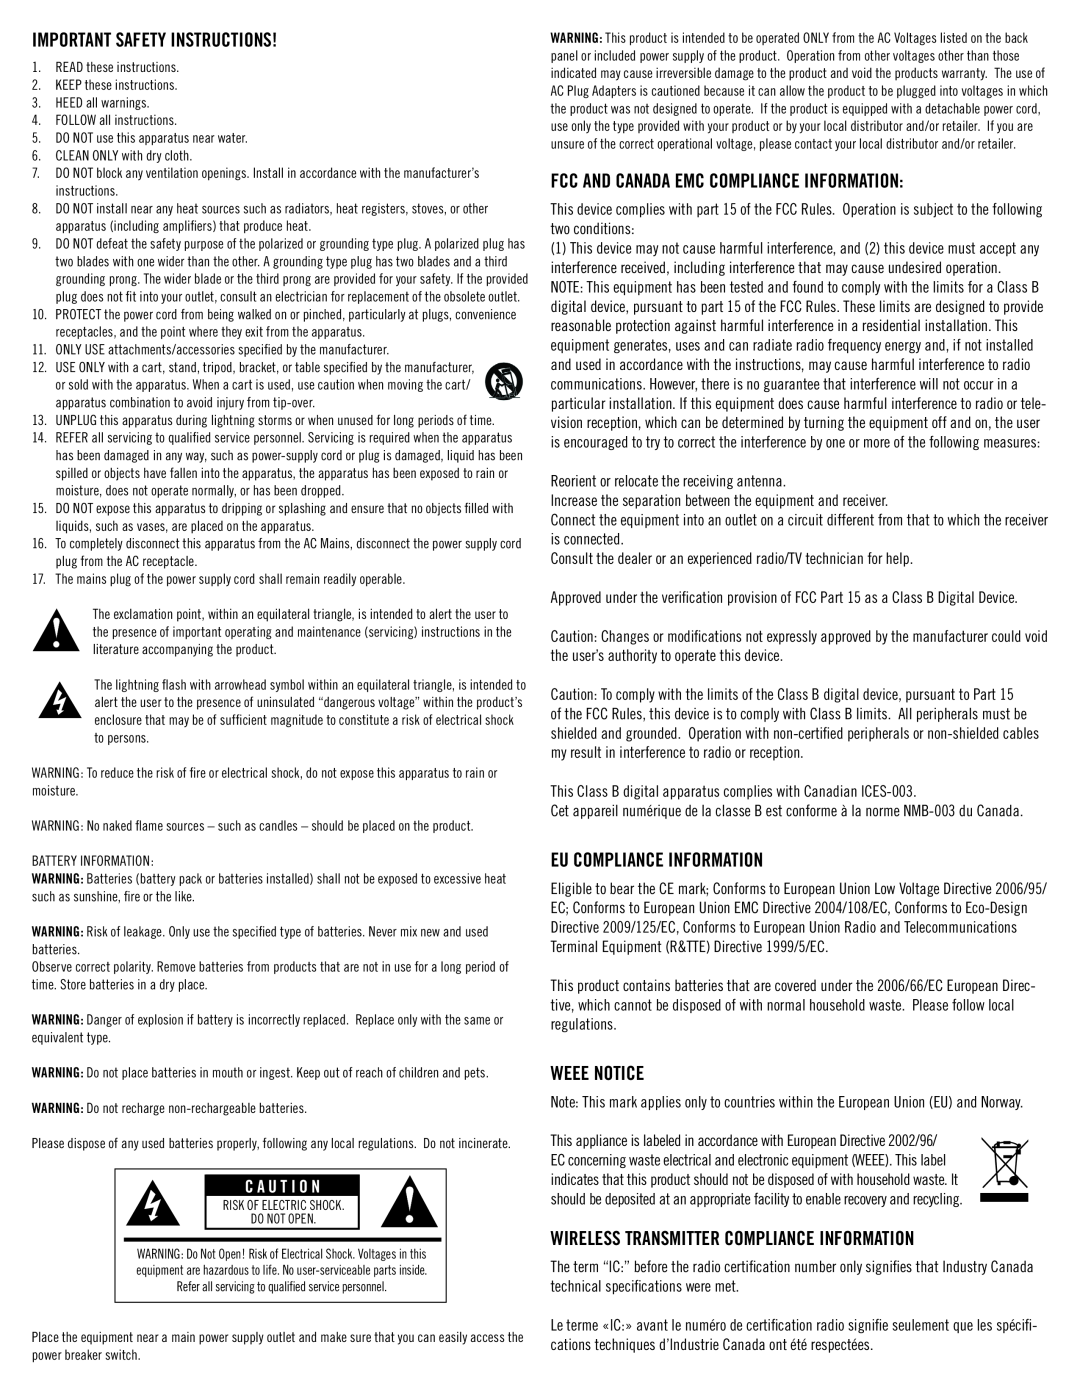 Klipsch SB 1 Important Safety INSTRUCTIONS, Fcc And Canada Emc Compliance Information, Eu Compliance Information 